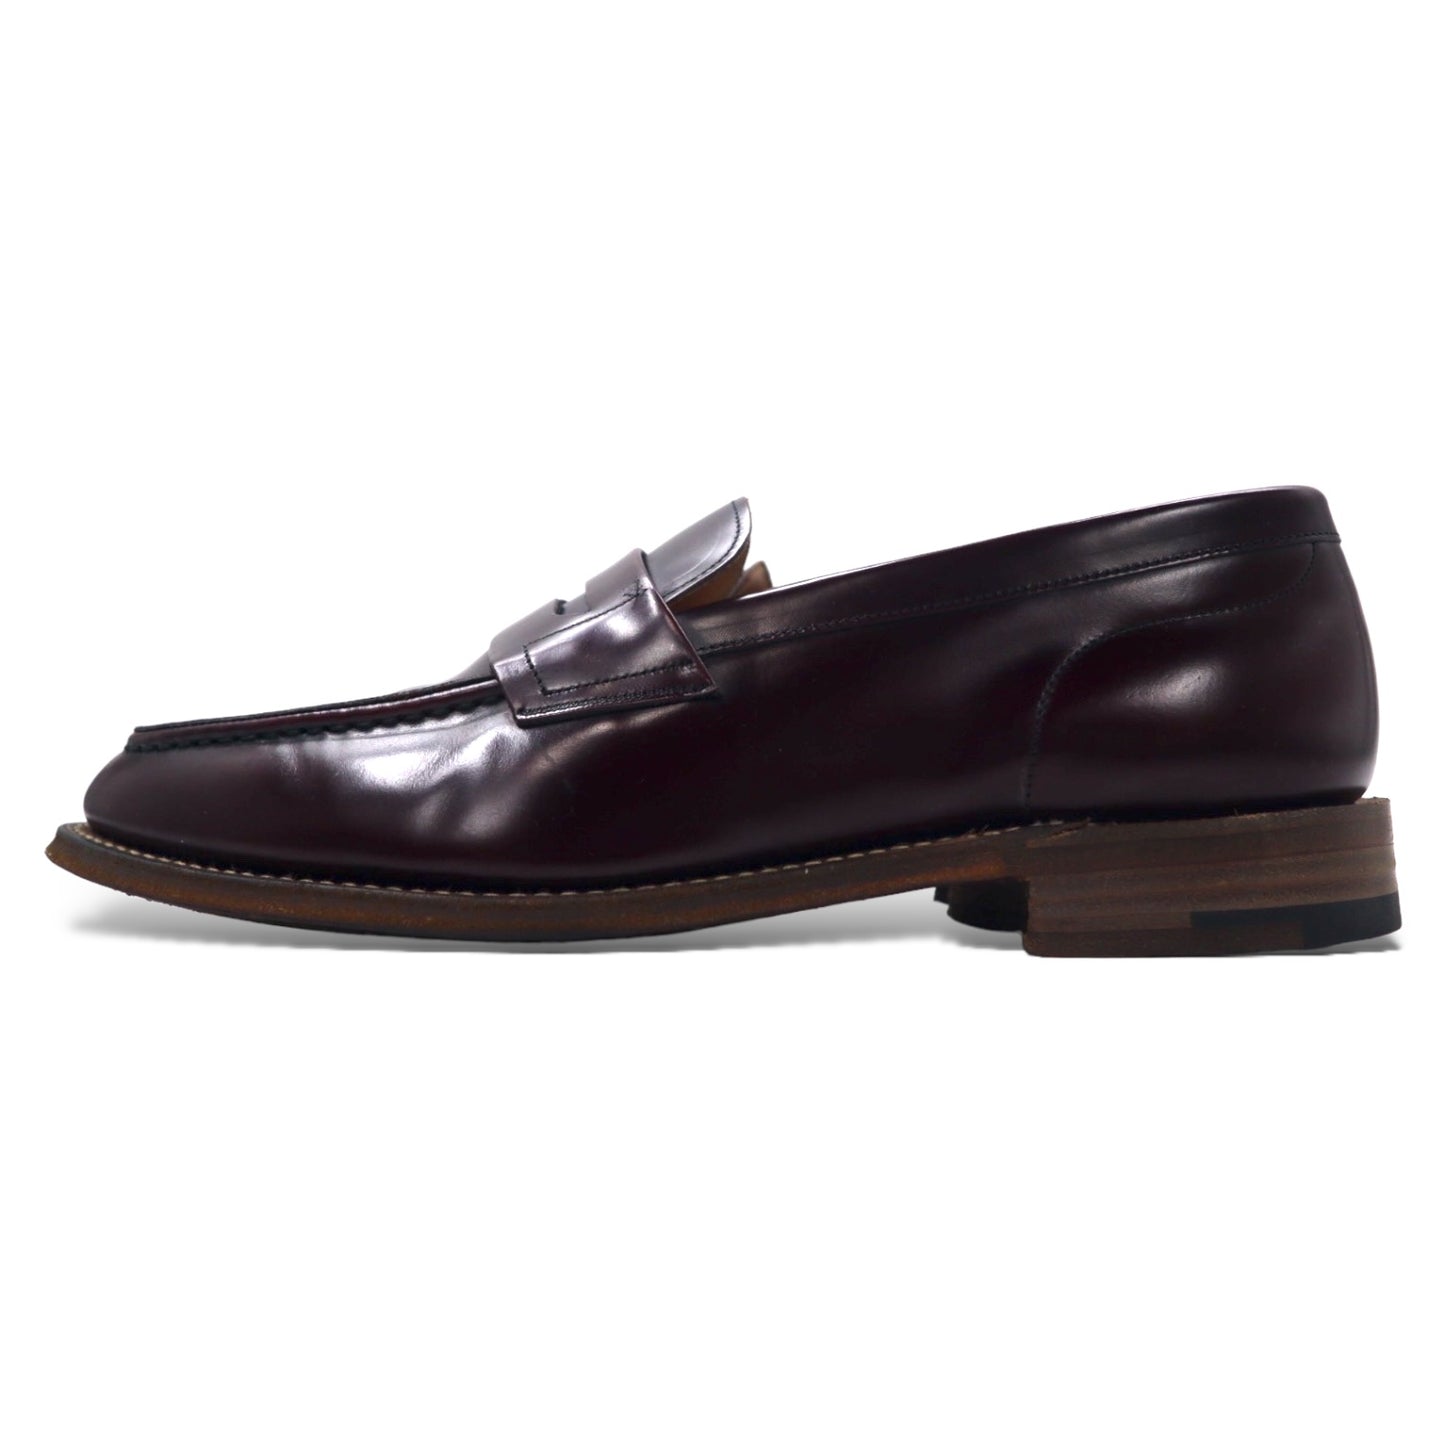 Church's England Made Darwin Coin Loafers 27-US9.5 bordeaux calf 